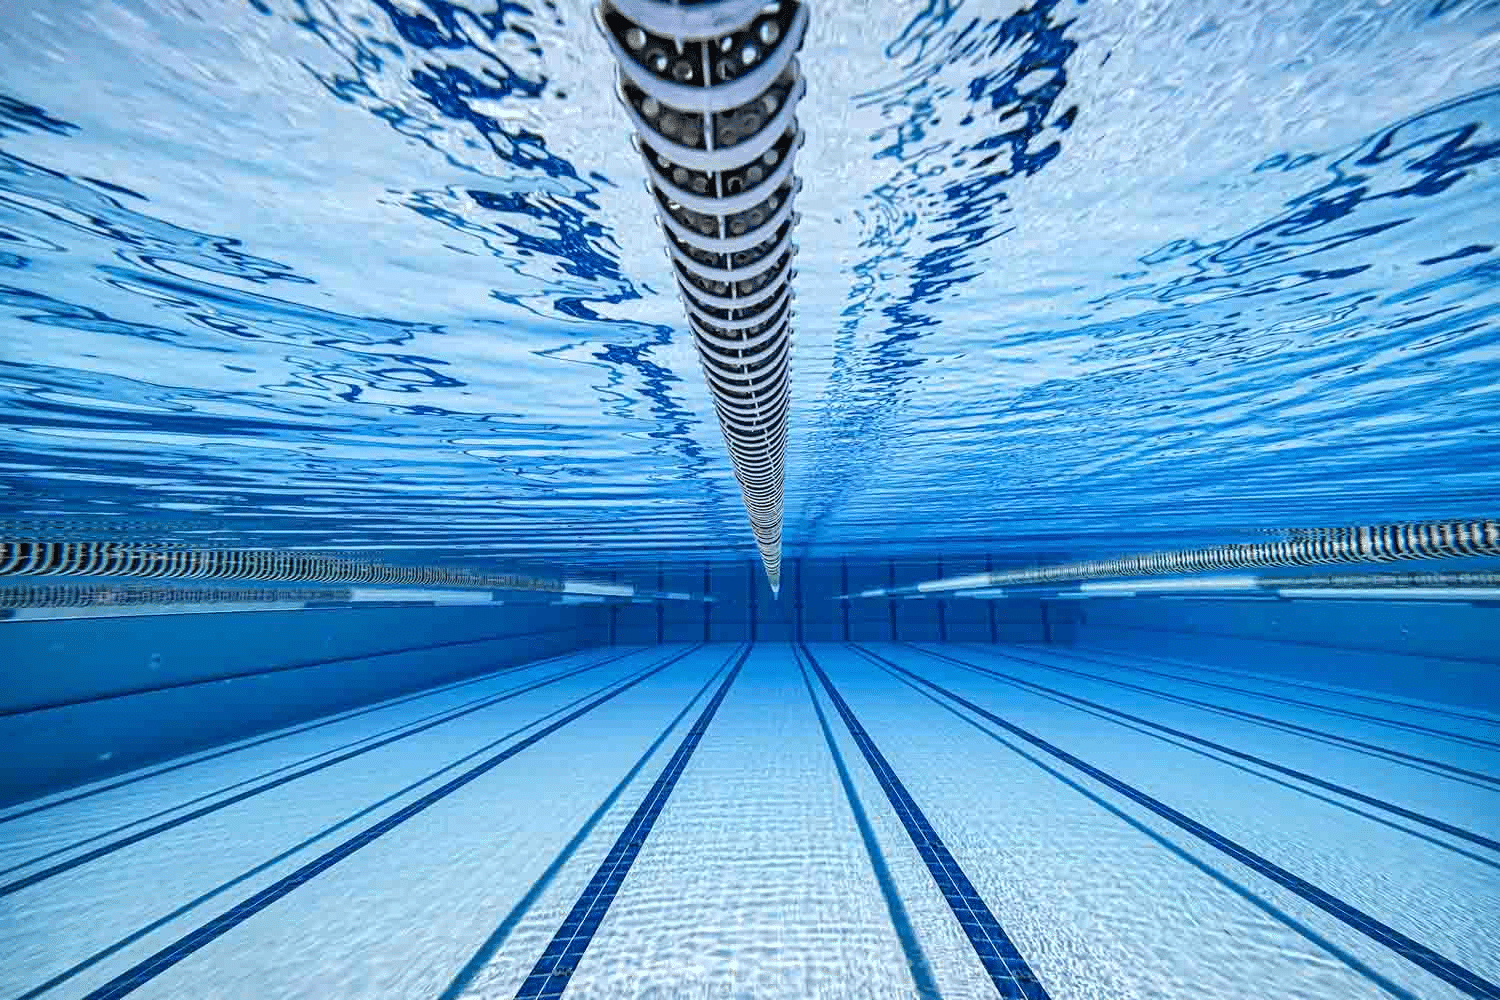 Underwater view of a clear, blue swimming pool showing lane markers and the ripple of water on the surface, with lane ropes extending toward the horizon. | AES - Pool Heating & Energy Efficient Products